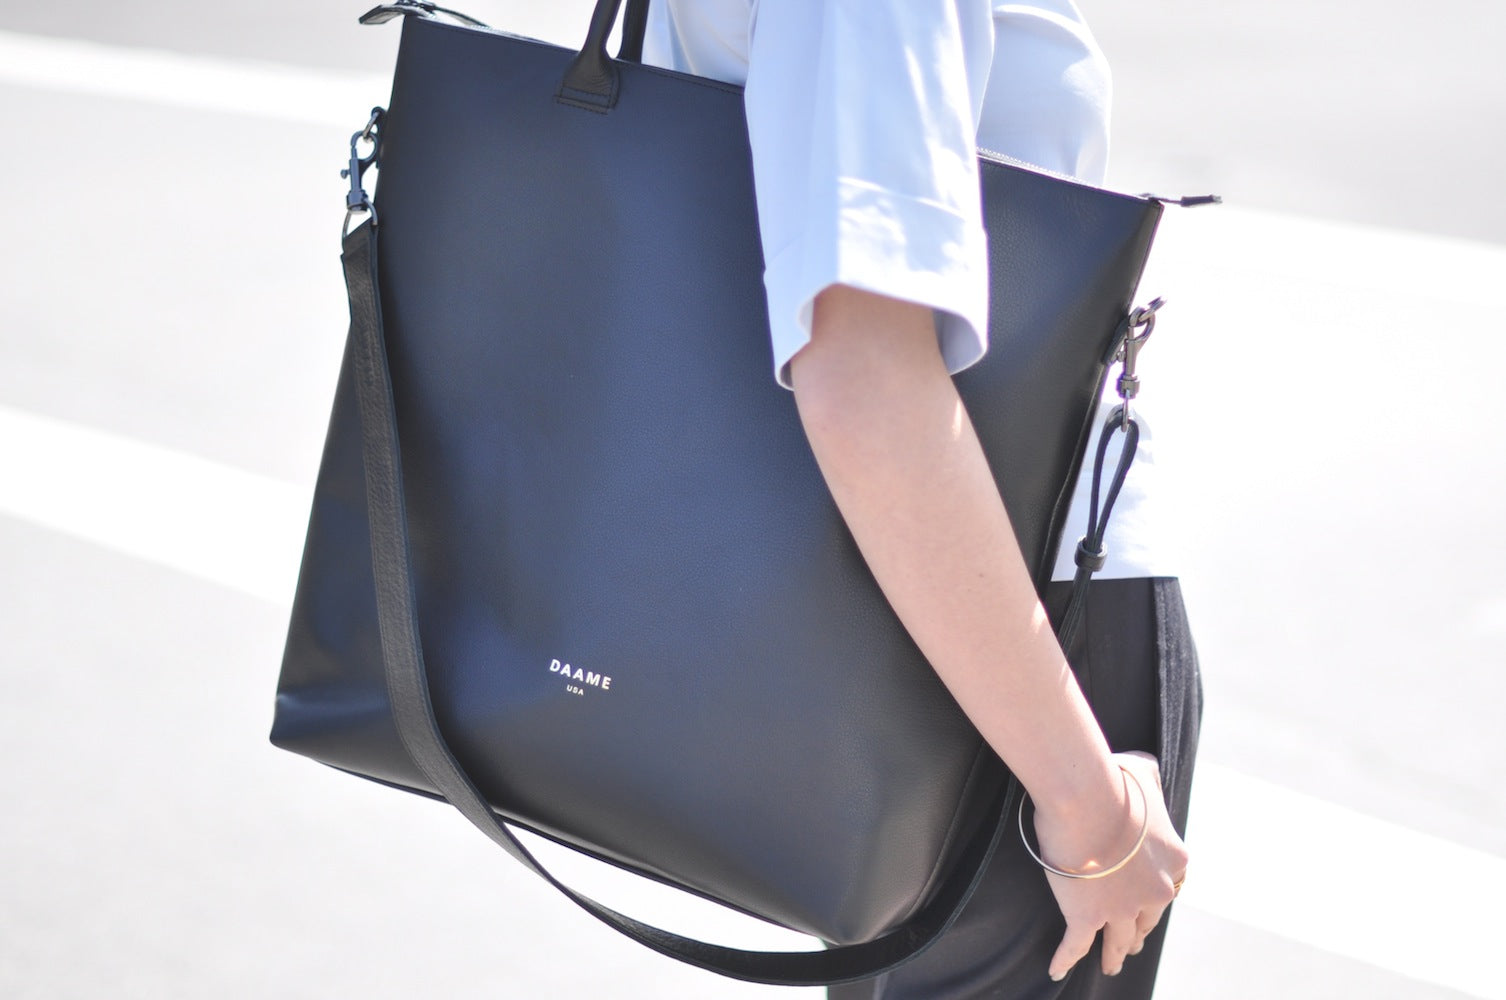 close-up of Daame leather laptop tote